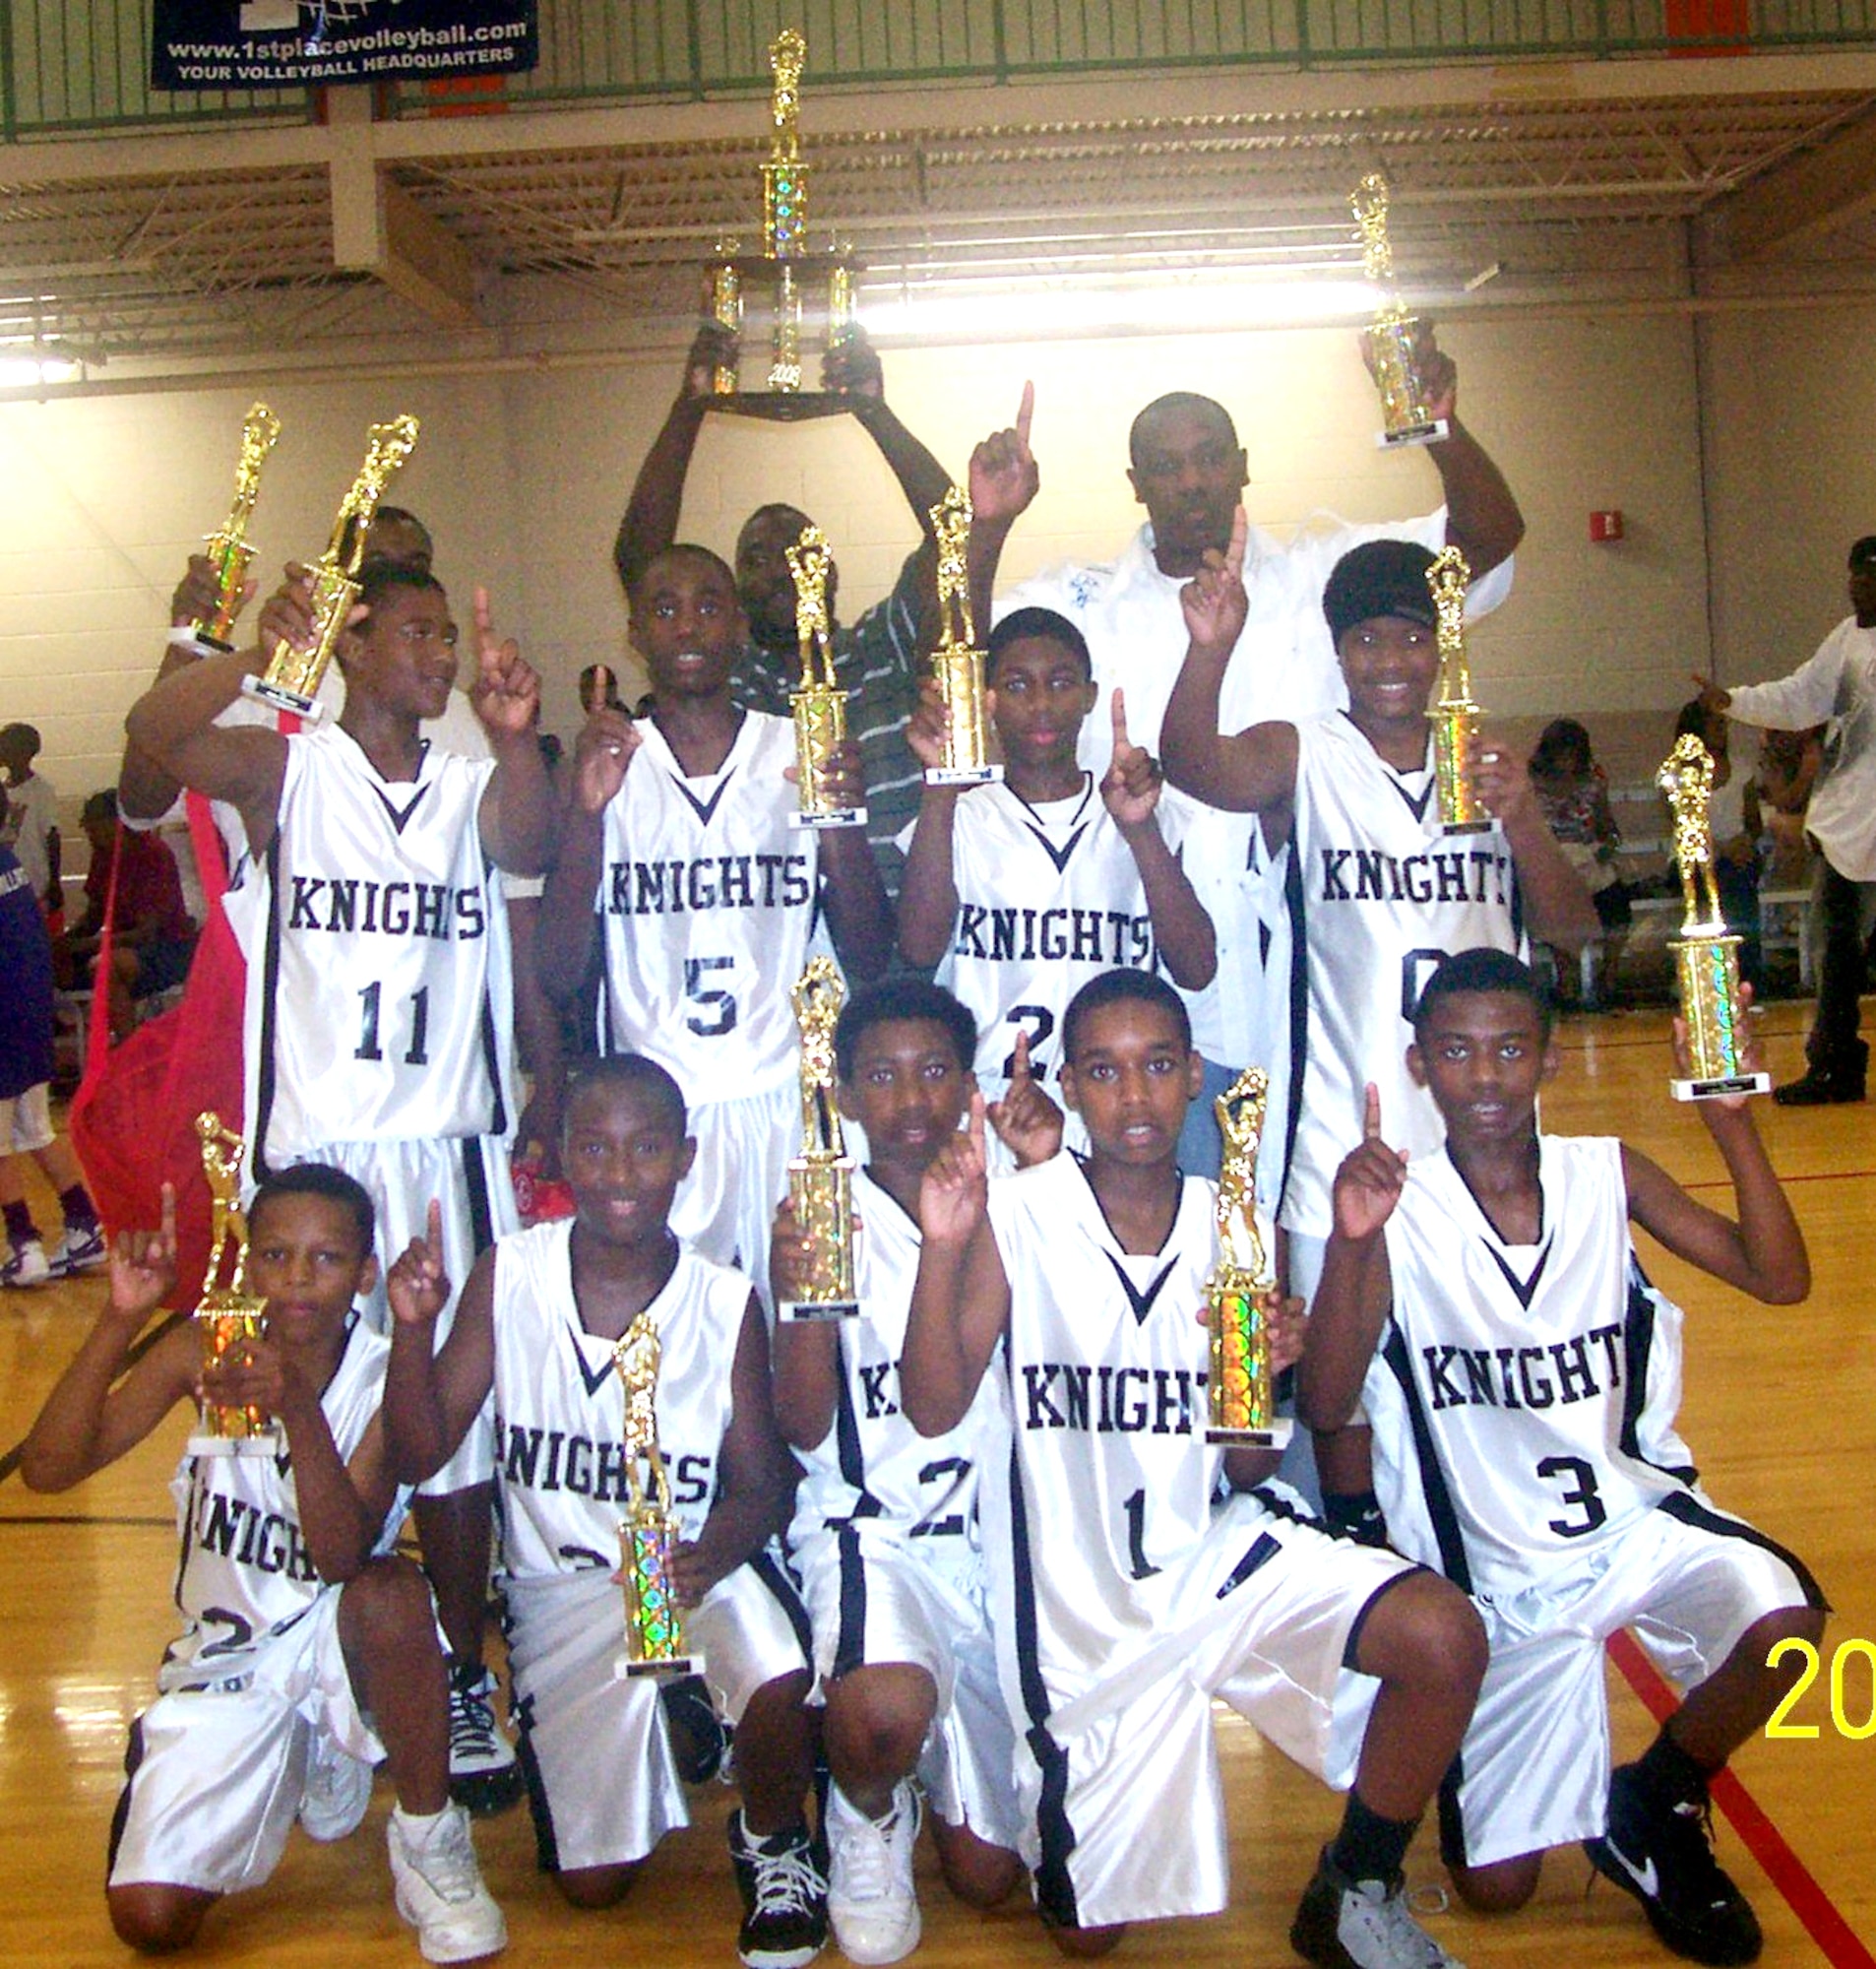 Members of the Perry Knights basketball team display trophies for winning the Youth Basketball of America 12-and-under Division II state championship. The Team will now compete in the YBOA national championships in Orlando, Fla. Courtesy photo